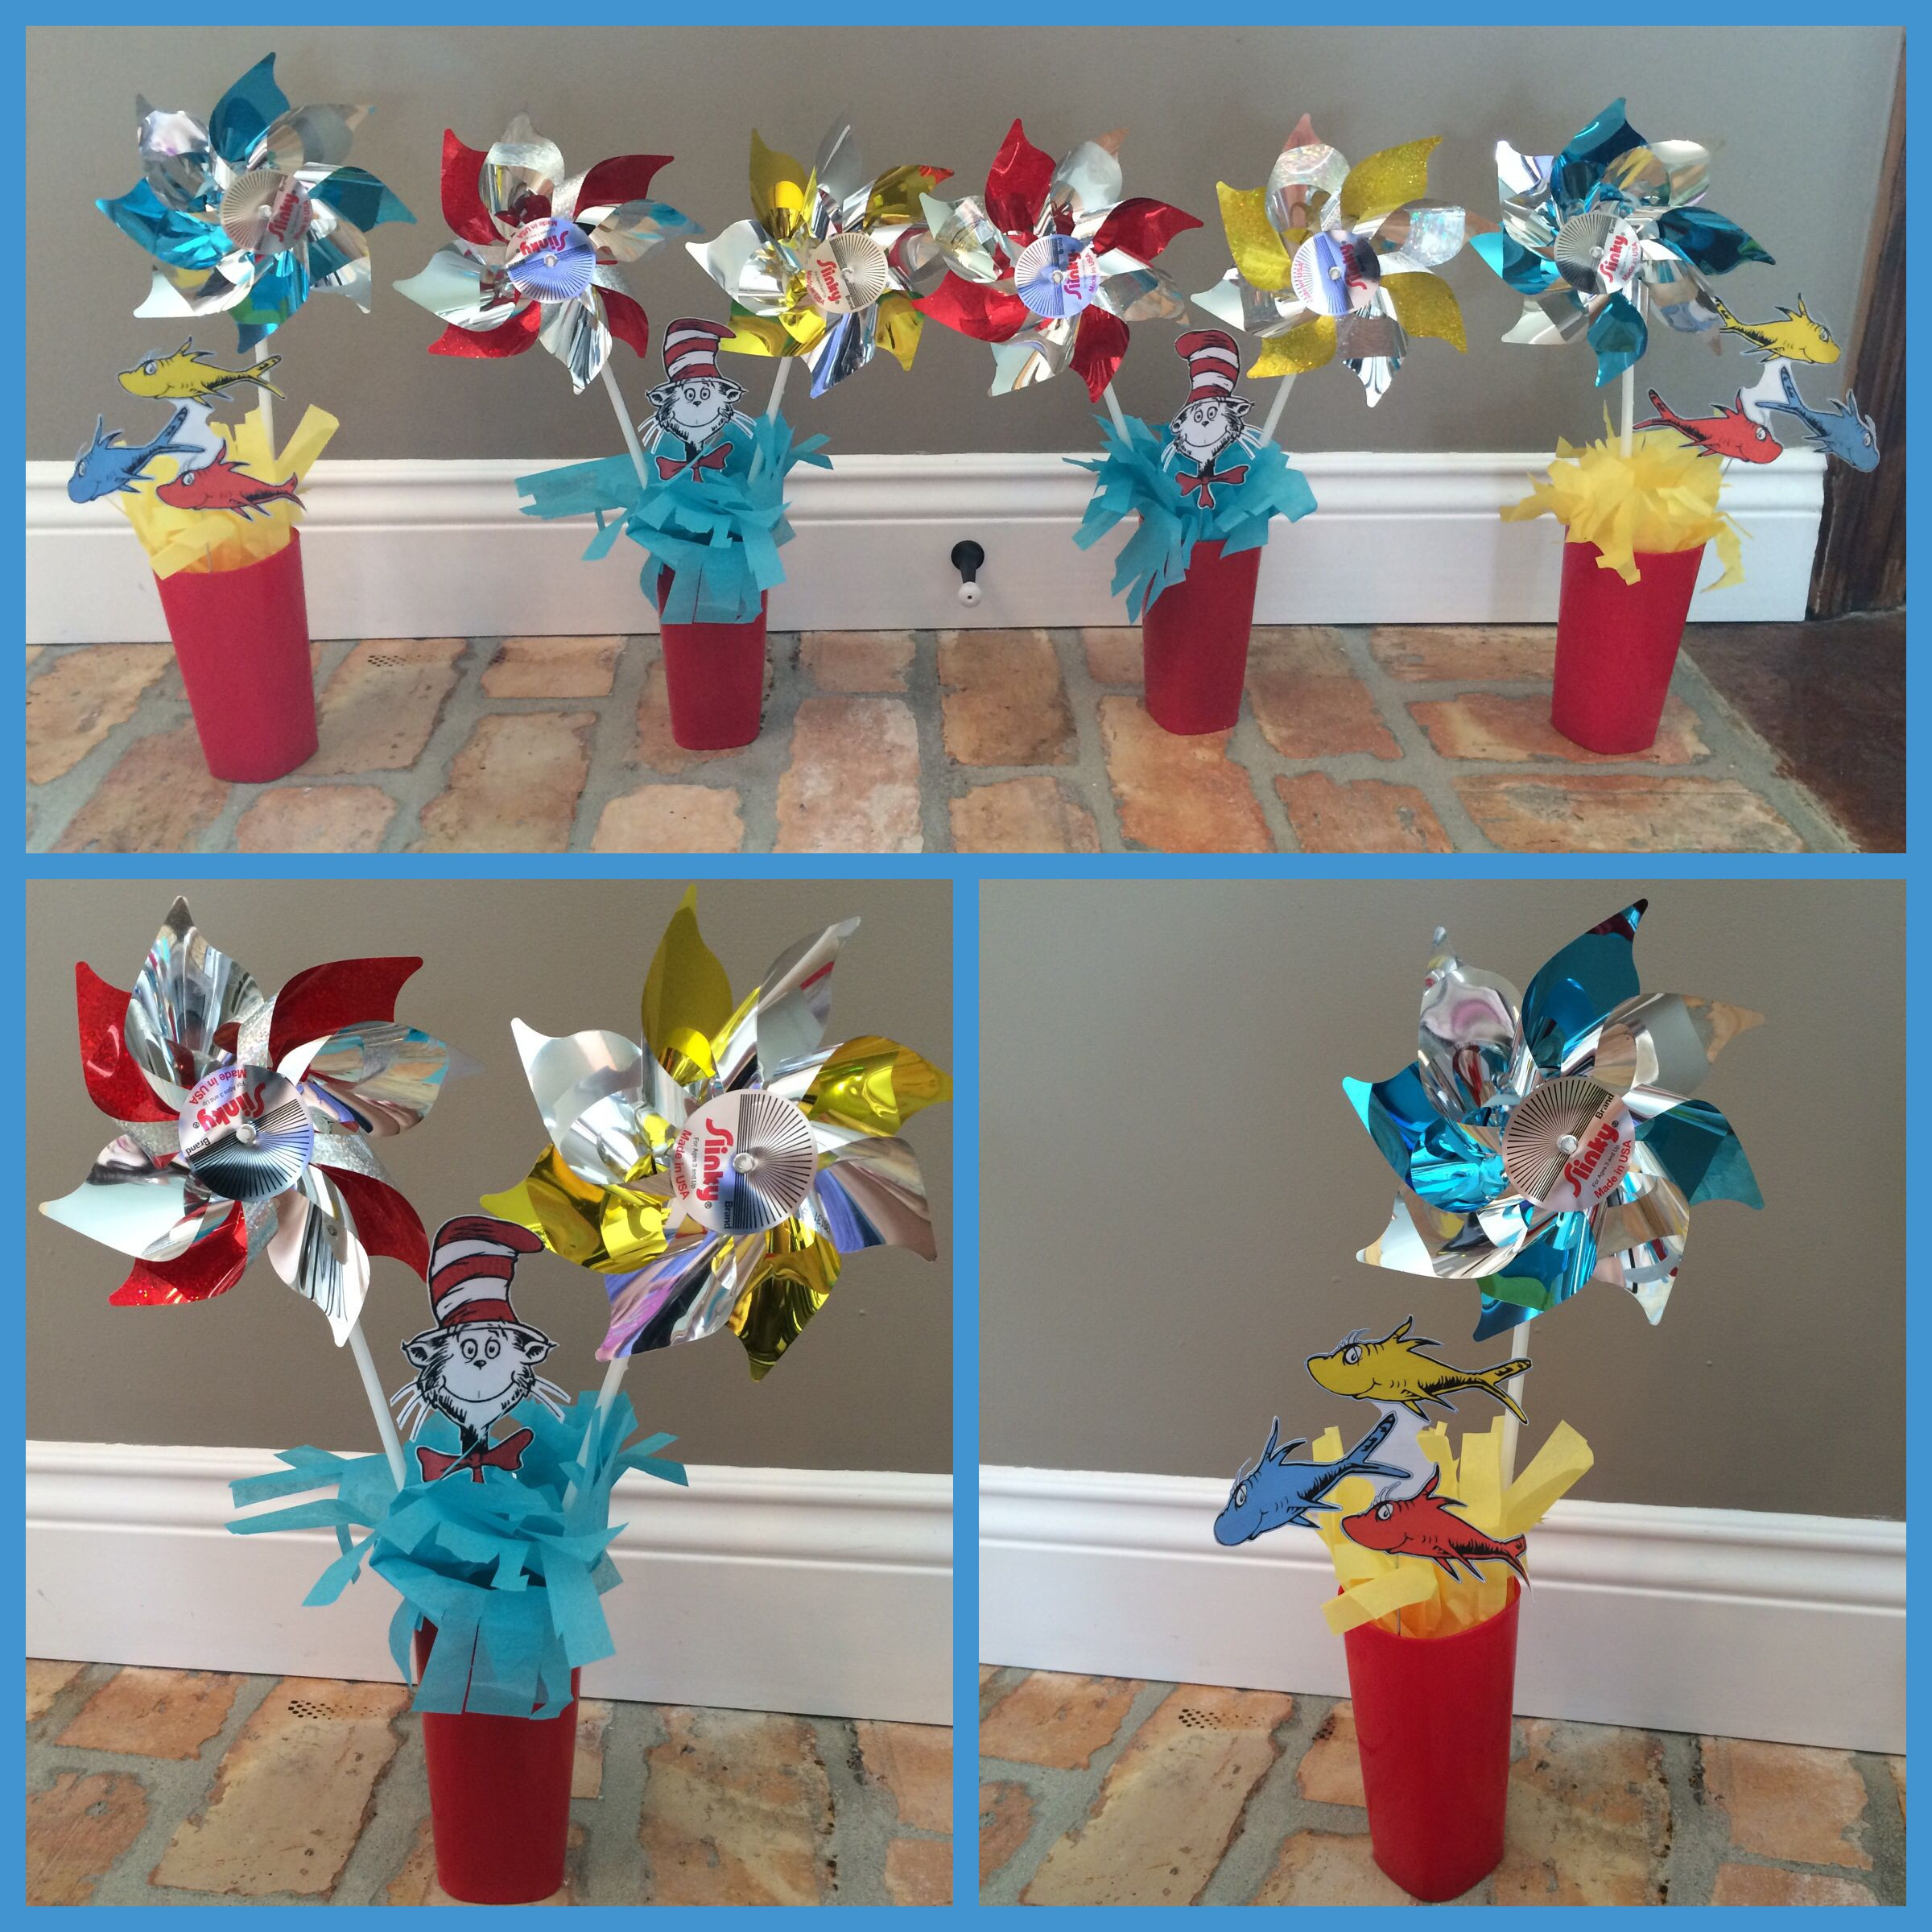 Dr Seuss Decorations DIY
 DIY Dr Seuss Birthday party cake table decorations using